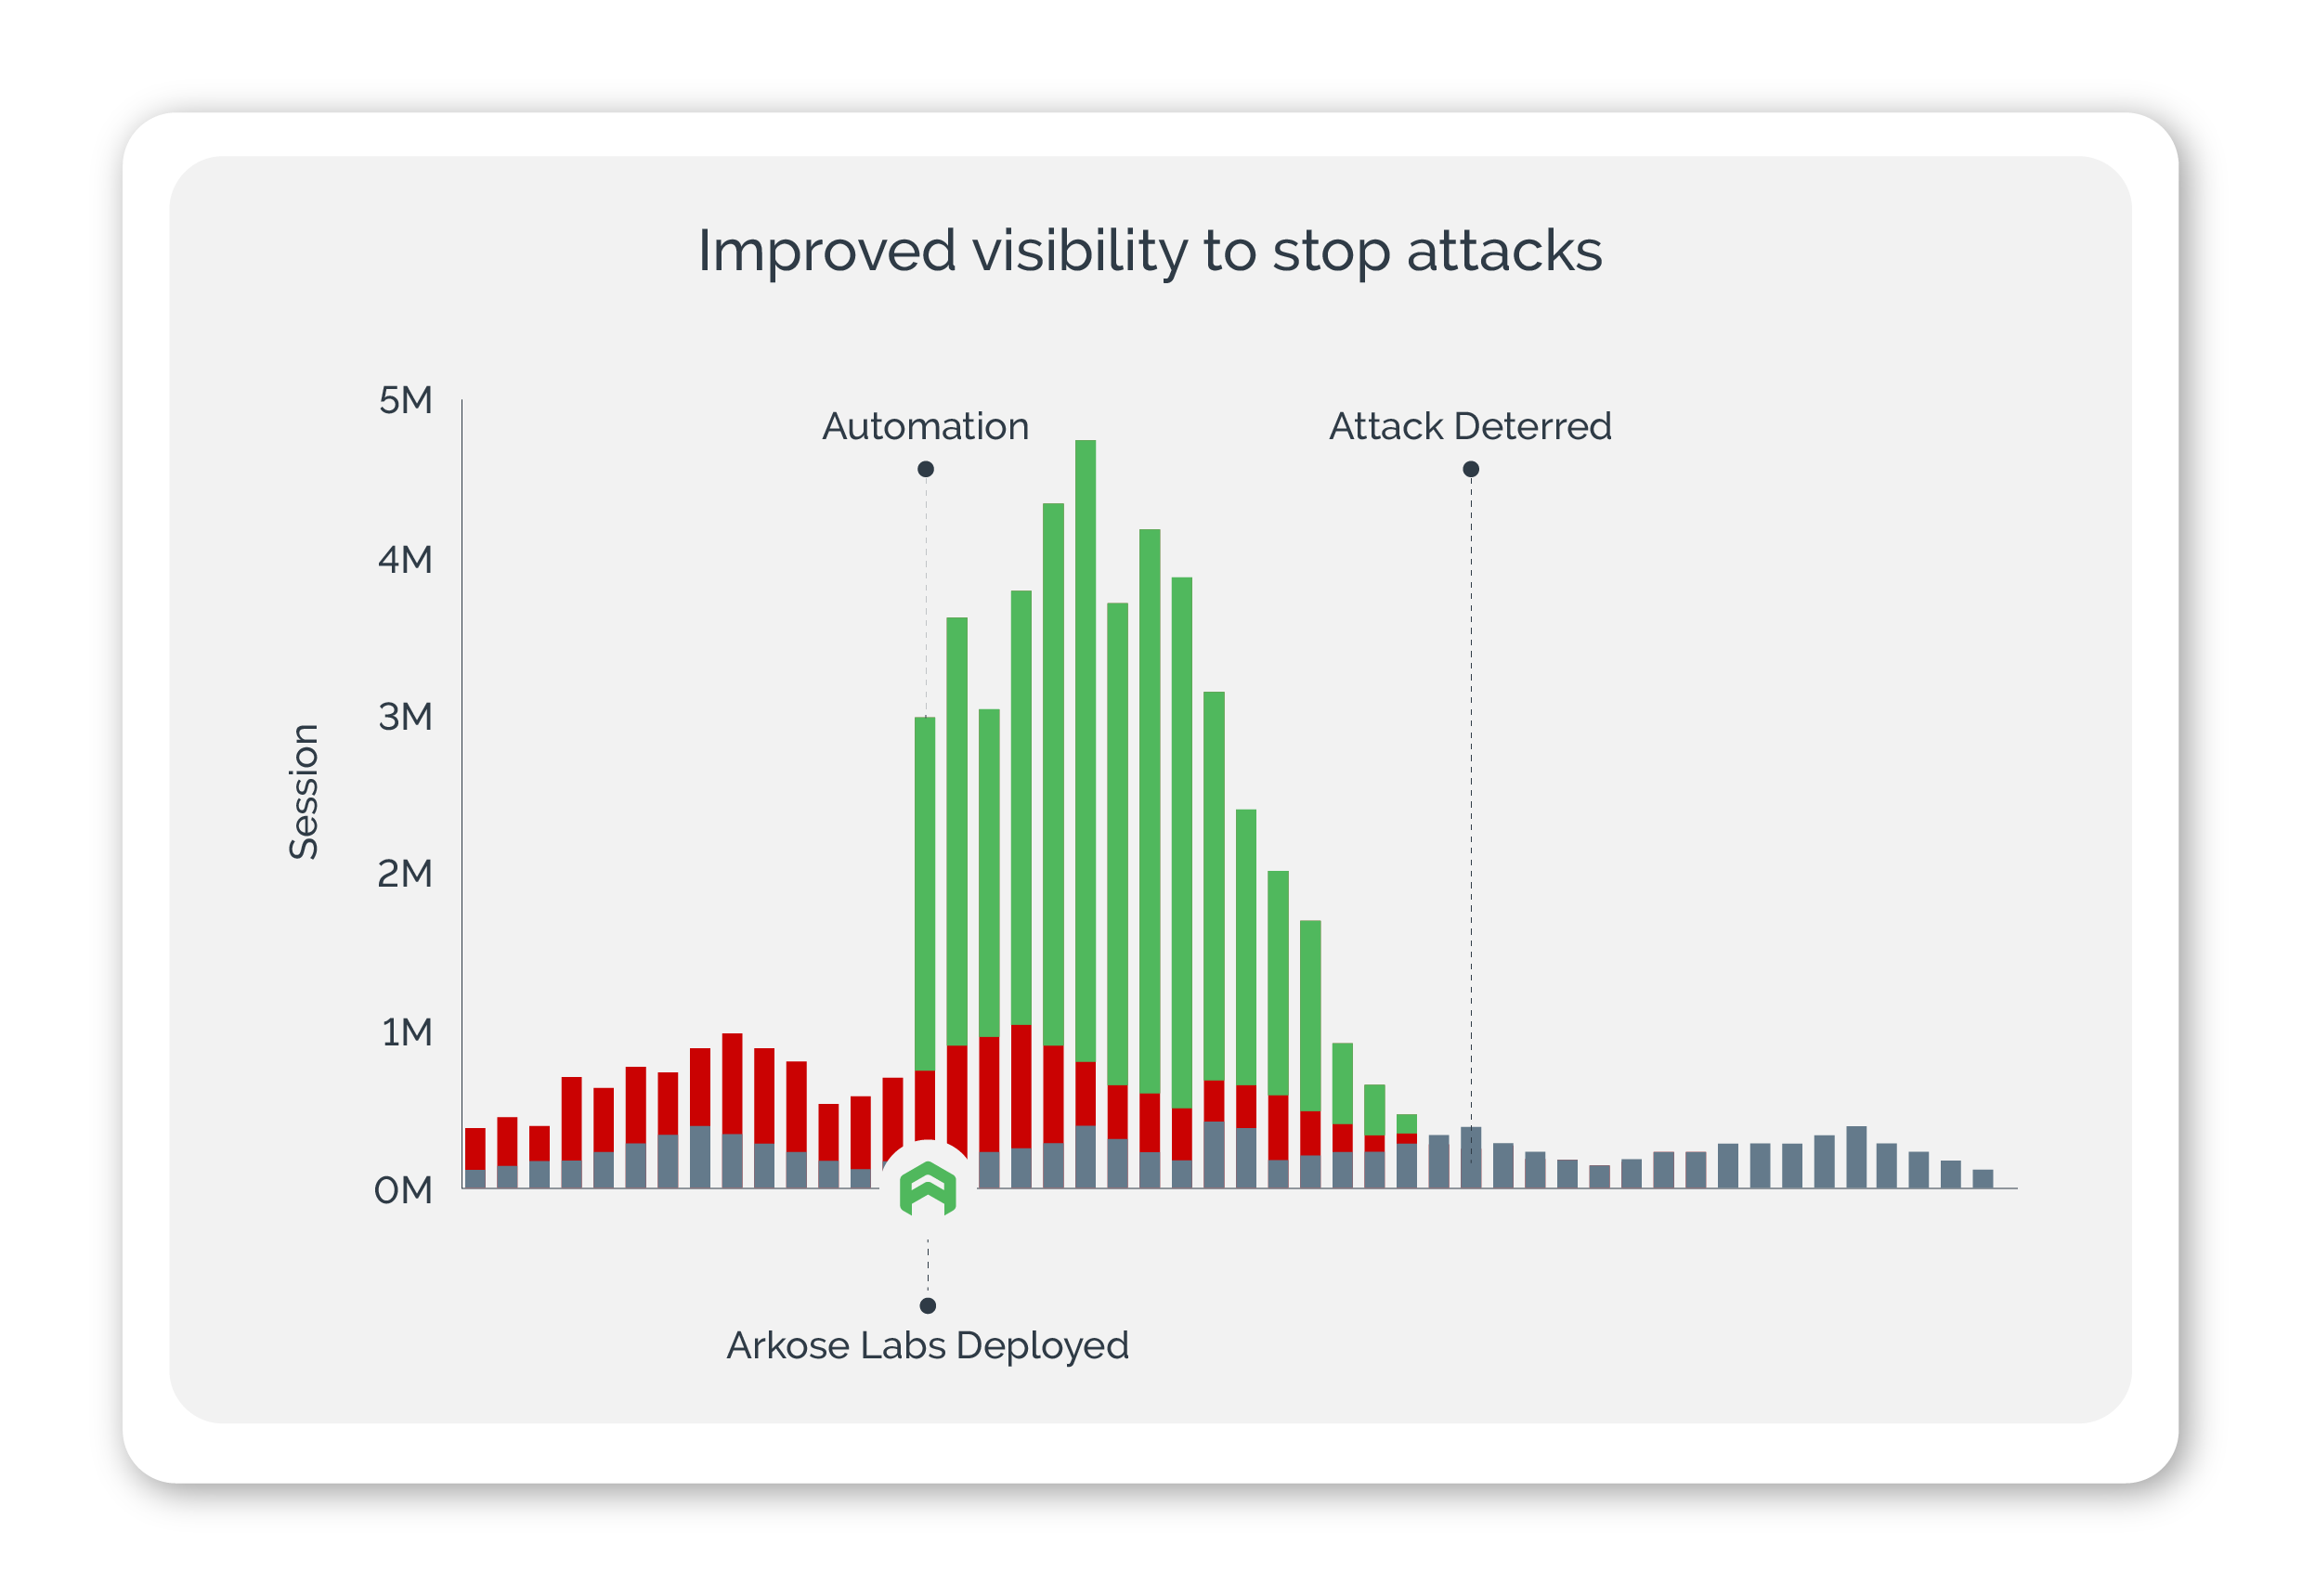 Our technology immediately impacts attack rates